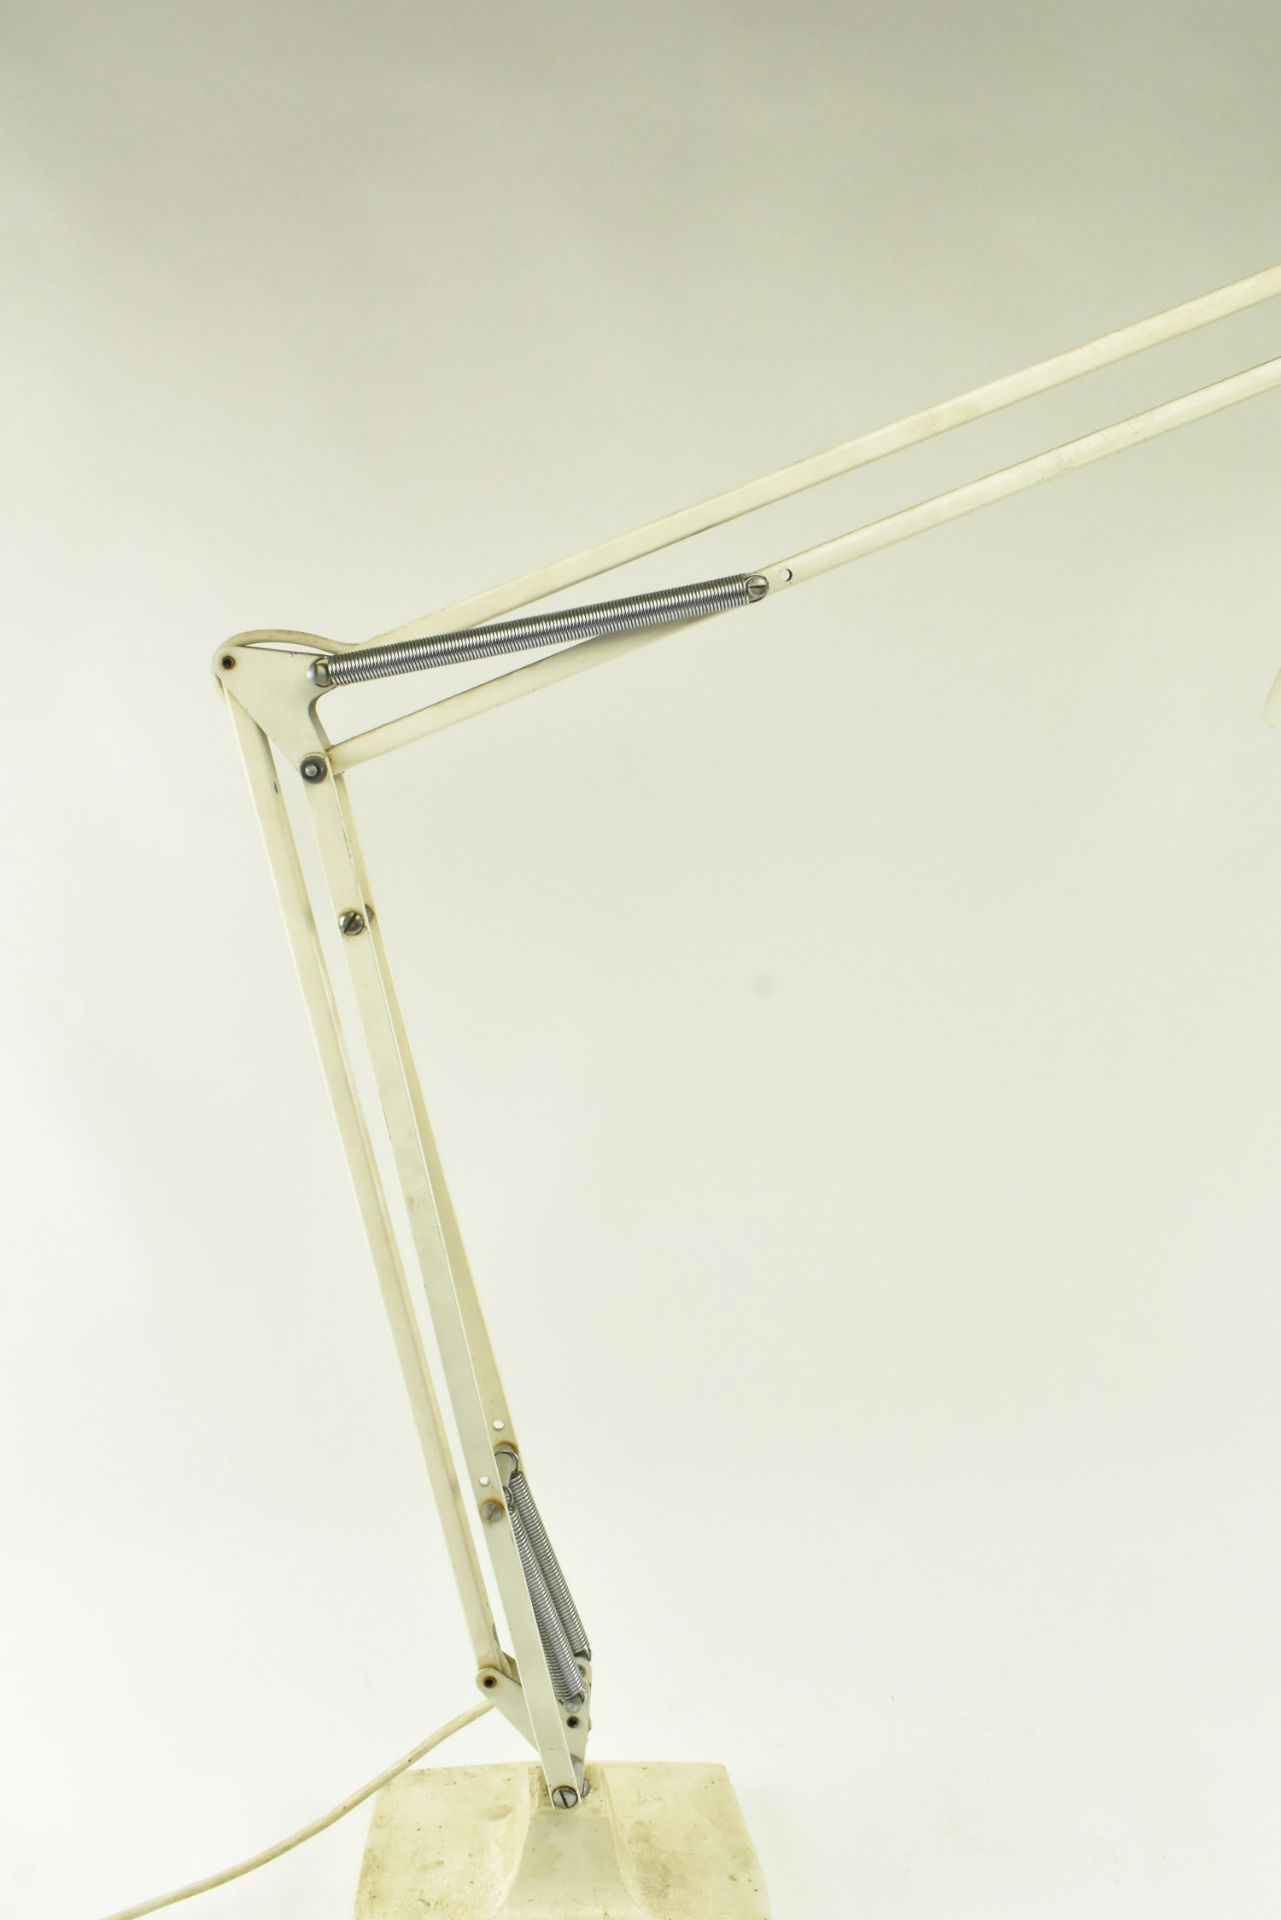 HERBERT TERRY & SONS - ANGLEPOISE 1208 PROTOTYPE DESK LAMP - Image 5 of 7